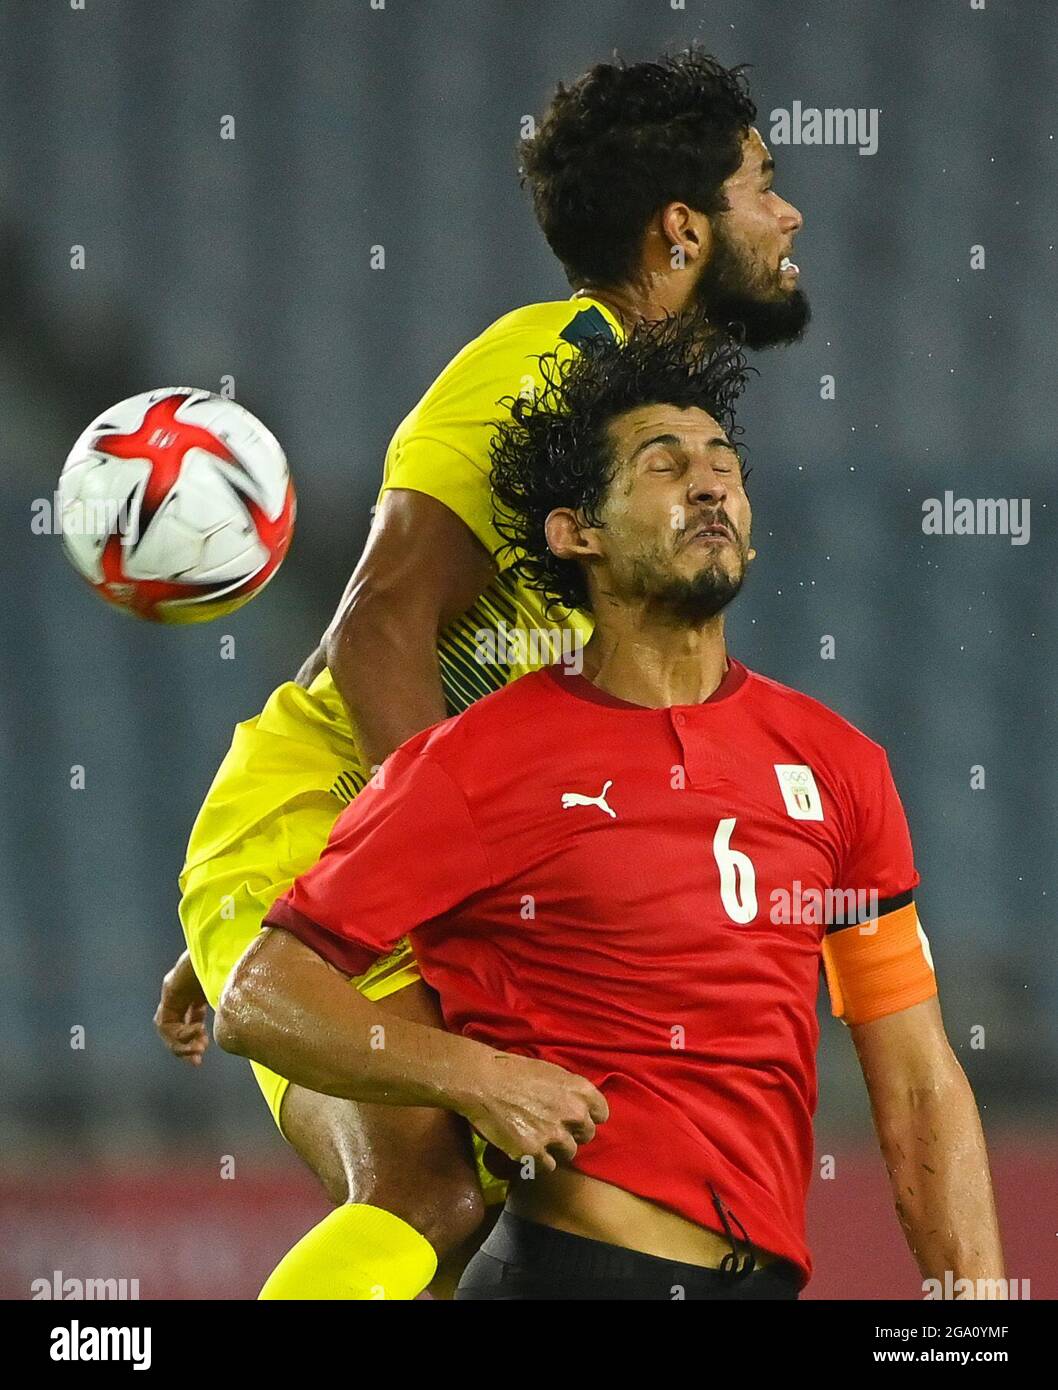 Miyagi, Japan. 28th July, 2021. Ahmed Hegazy (bottom) of Egypt vies with Jay Rich-Baghuelou of Australia during the men's group C football match between Australia and Egypt at the Tokyo 2020 Olympic Games in Miyagi, Japan, July 28, 2021. Credit: Lu Yang/Xinhua/Alamy Live News Stock Photo